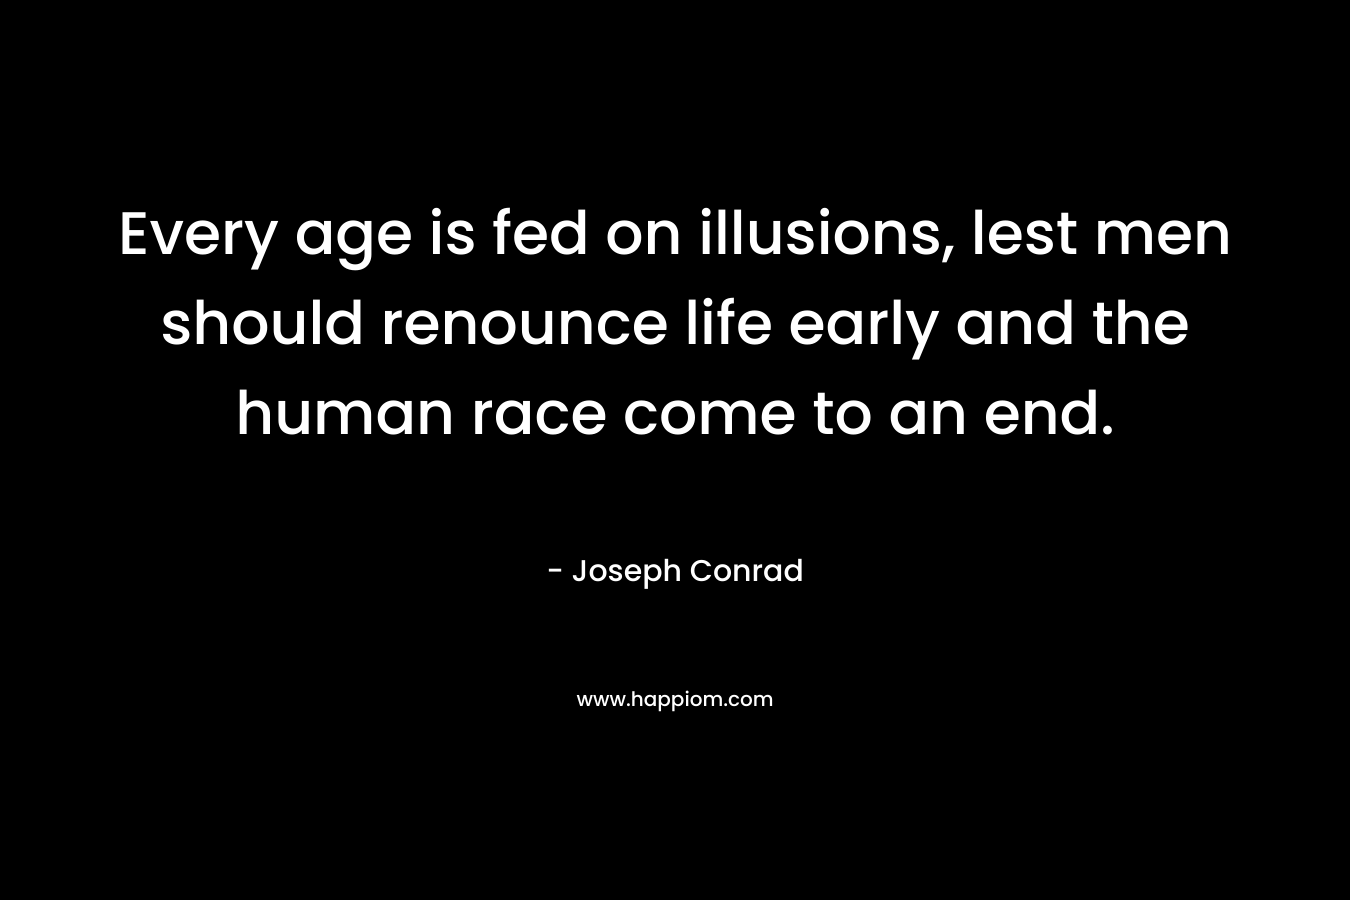 Every age is fed on illusions, lest men should renounce life early and the human race come to an end.